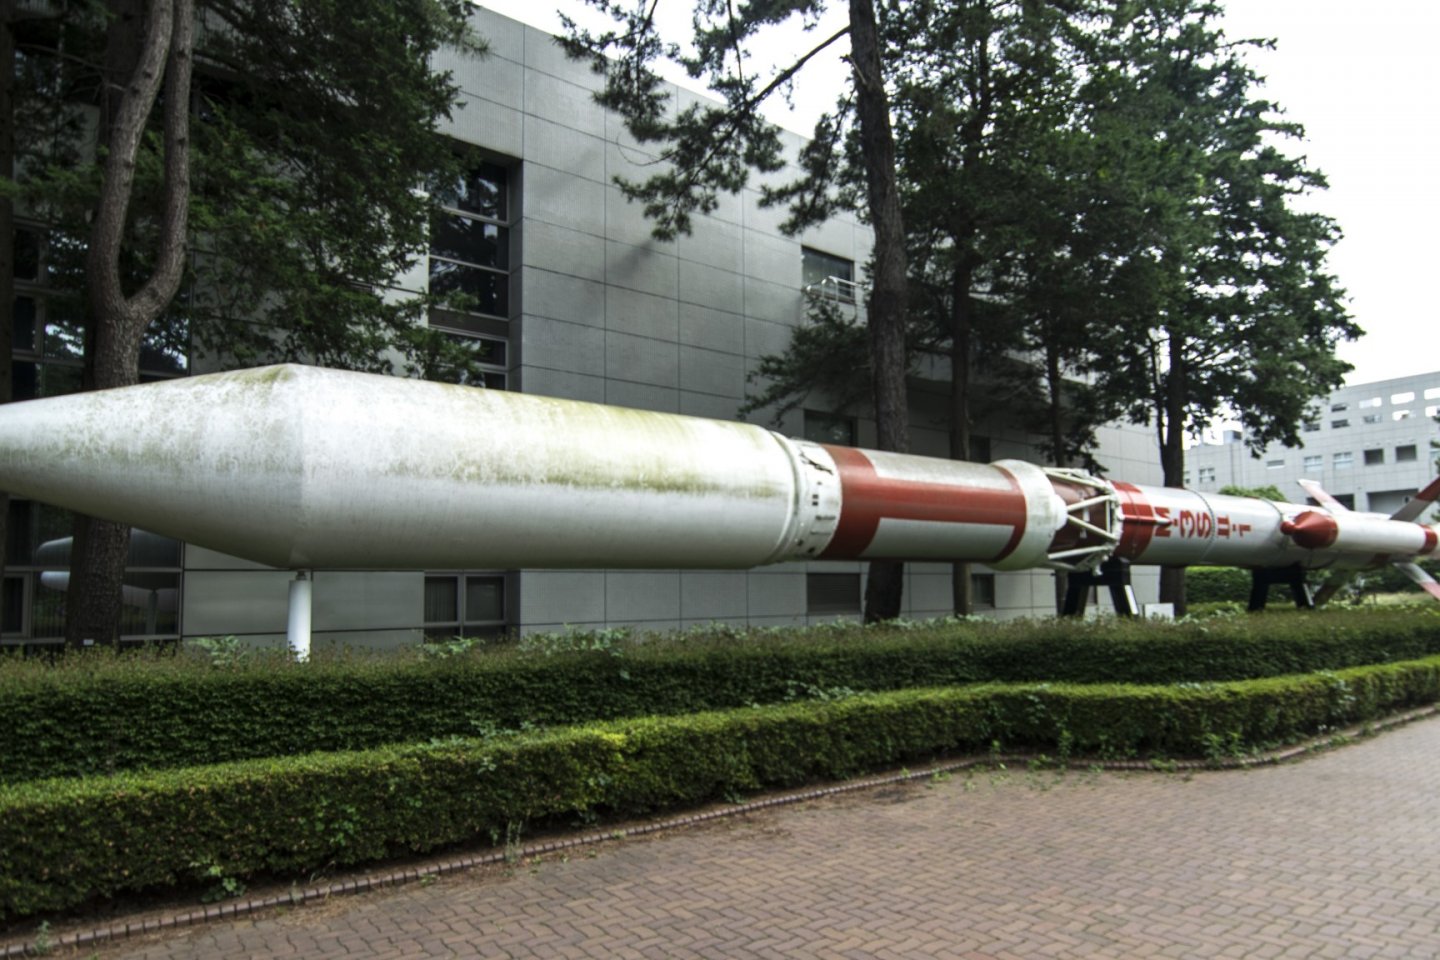 Standing at 28.7m long and 2.8m in diameter, the gigantic M-3 S11 Rocket is truly a sight to behold.